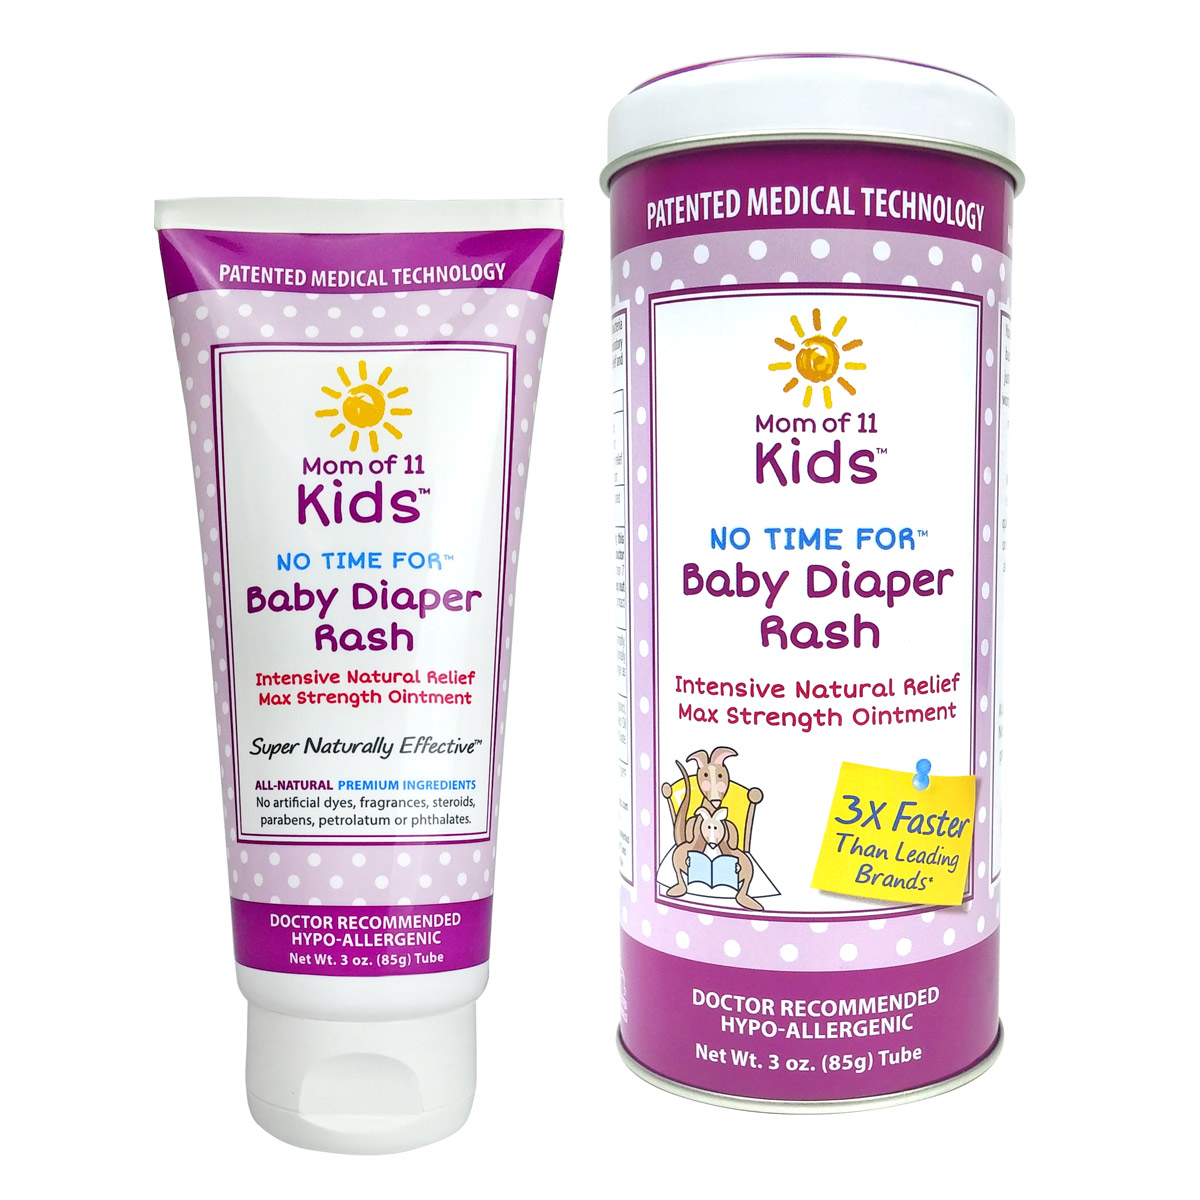 No Time for Baby Diaper Rash